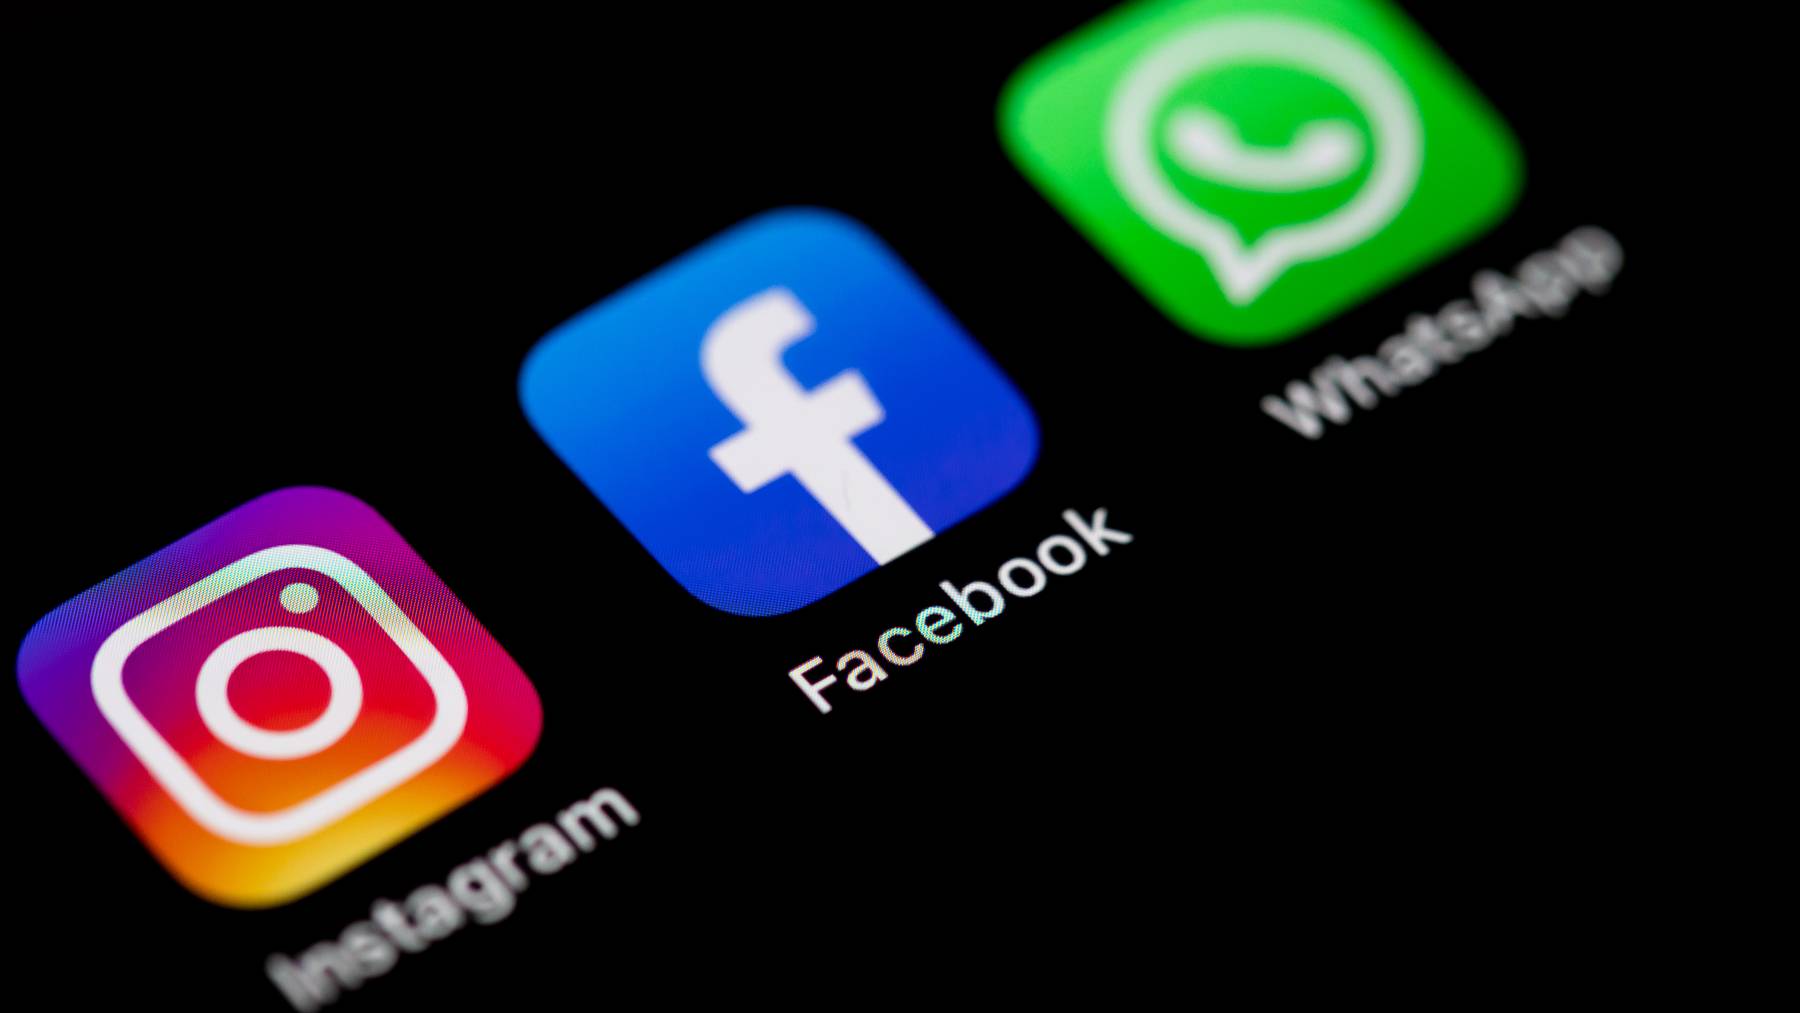 In this photo illustration, The Instagram, Facebook und WhatsApp logos on the screen of an iPhone on March 09, 2021 in Kirchheim unter Teck, Germany.